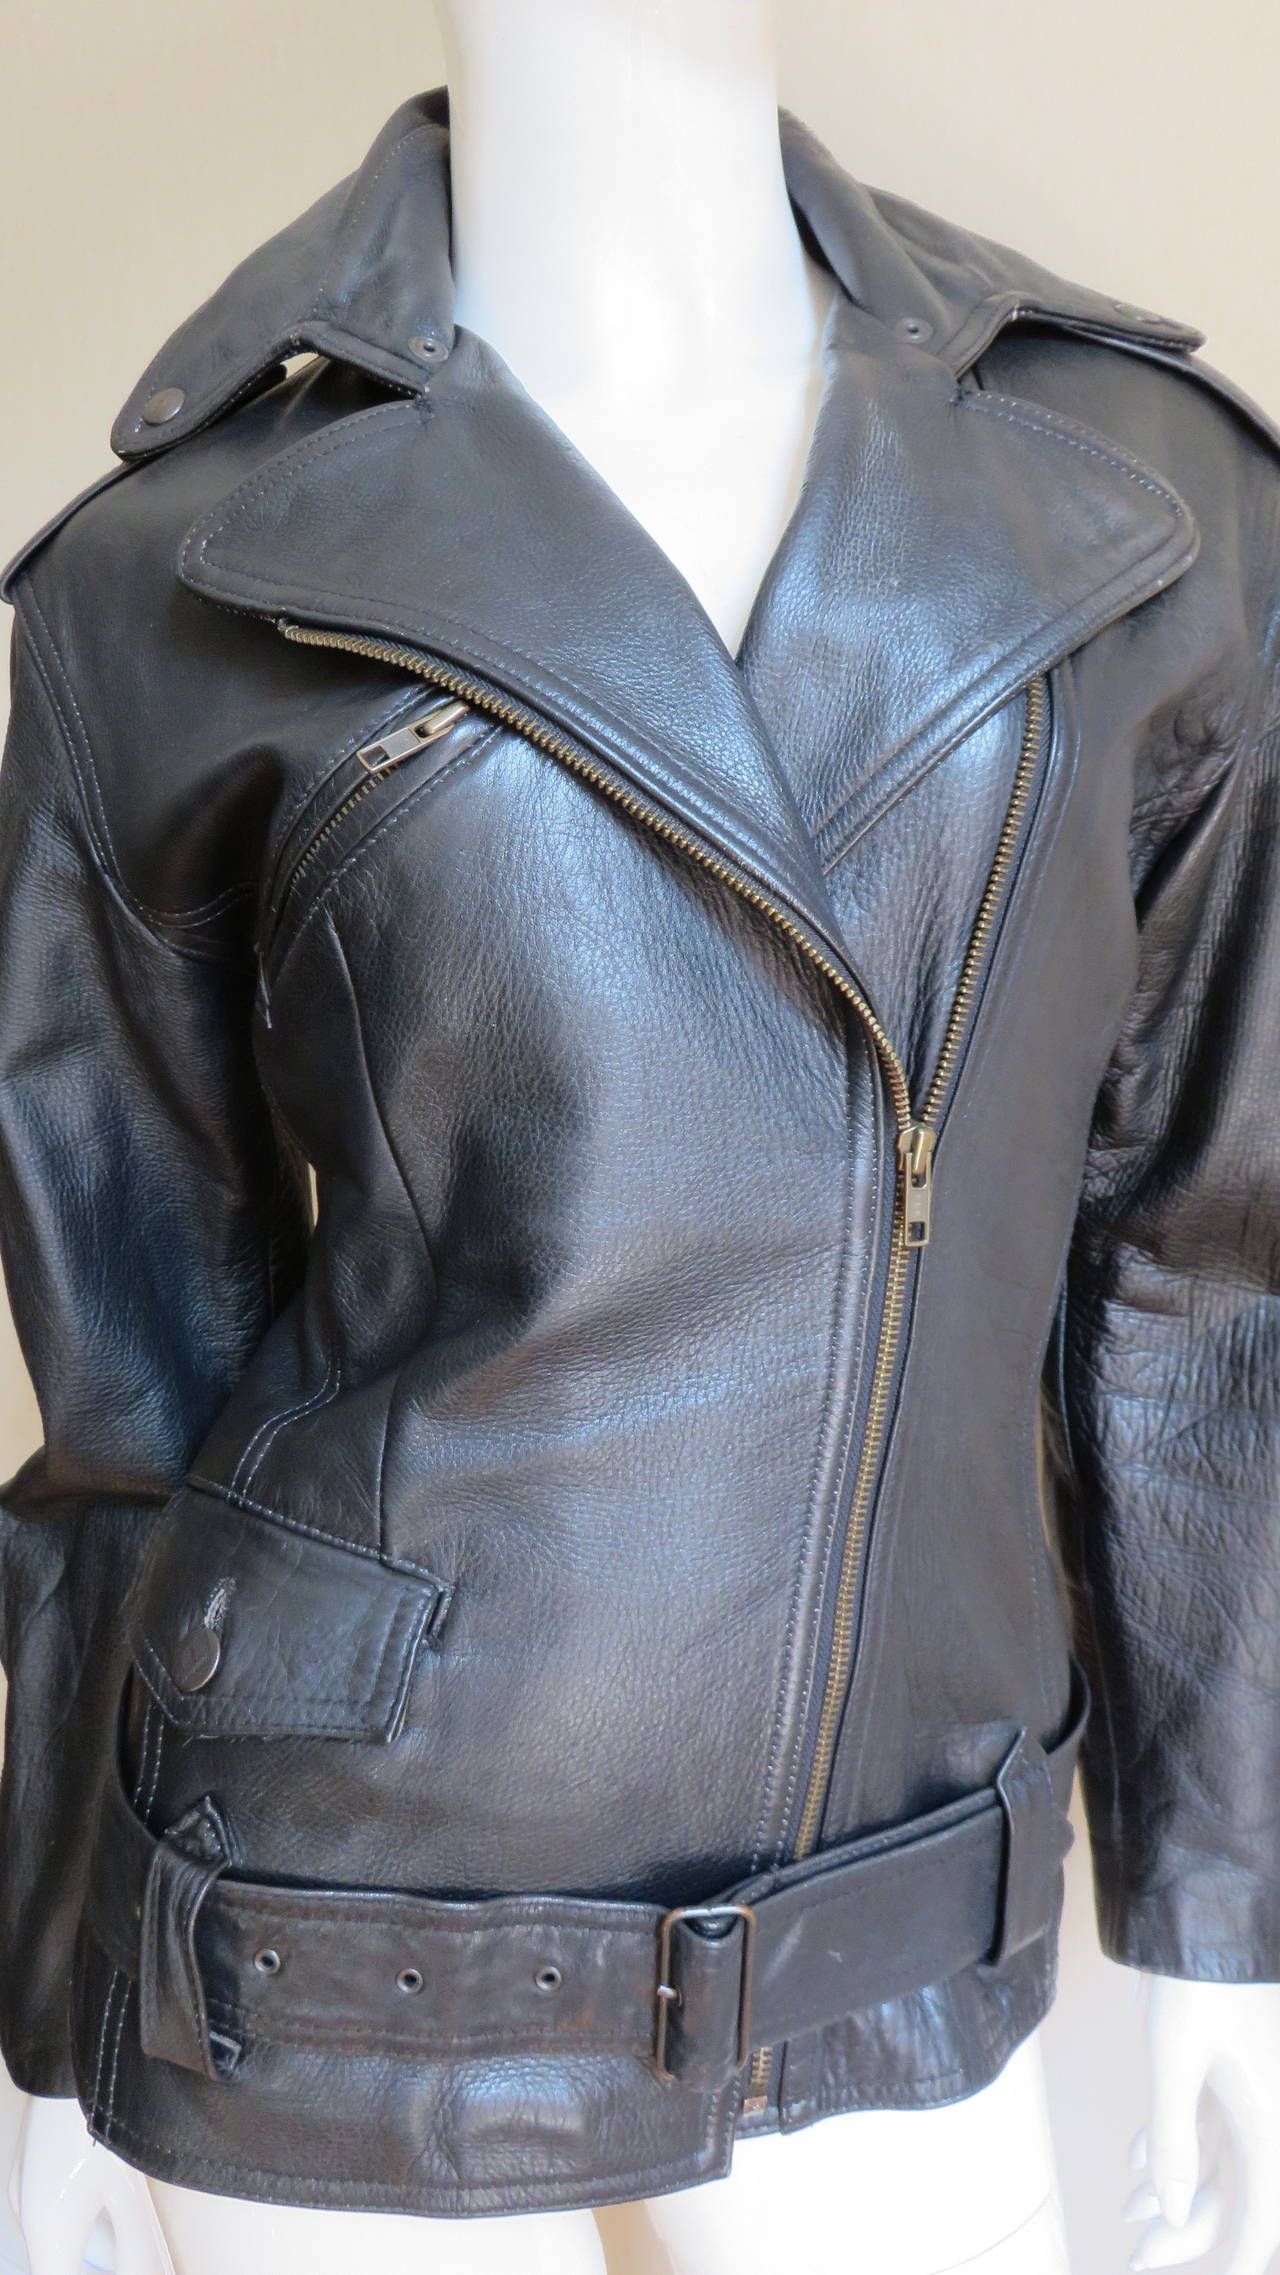 A take on the black motorcycle jacket from Jean Paul Gaultier's Junior Gaultier line.  It is long sleeved with zipper cuffs, a wide lapel collar and epauletts at the shoulders.  There is a zipper breast pocket, a metal Junior Gaultier button on the